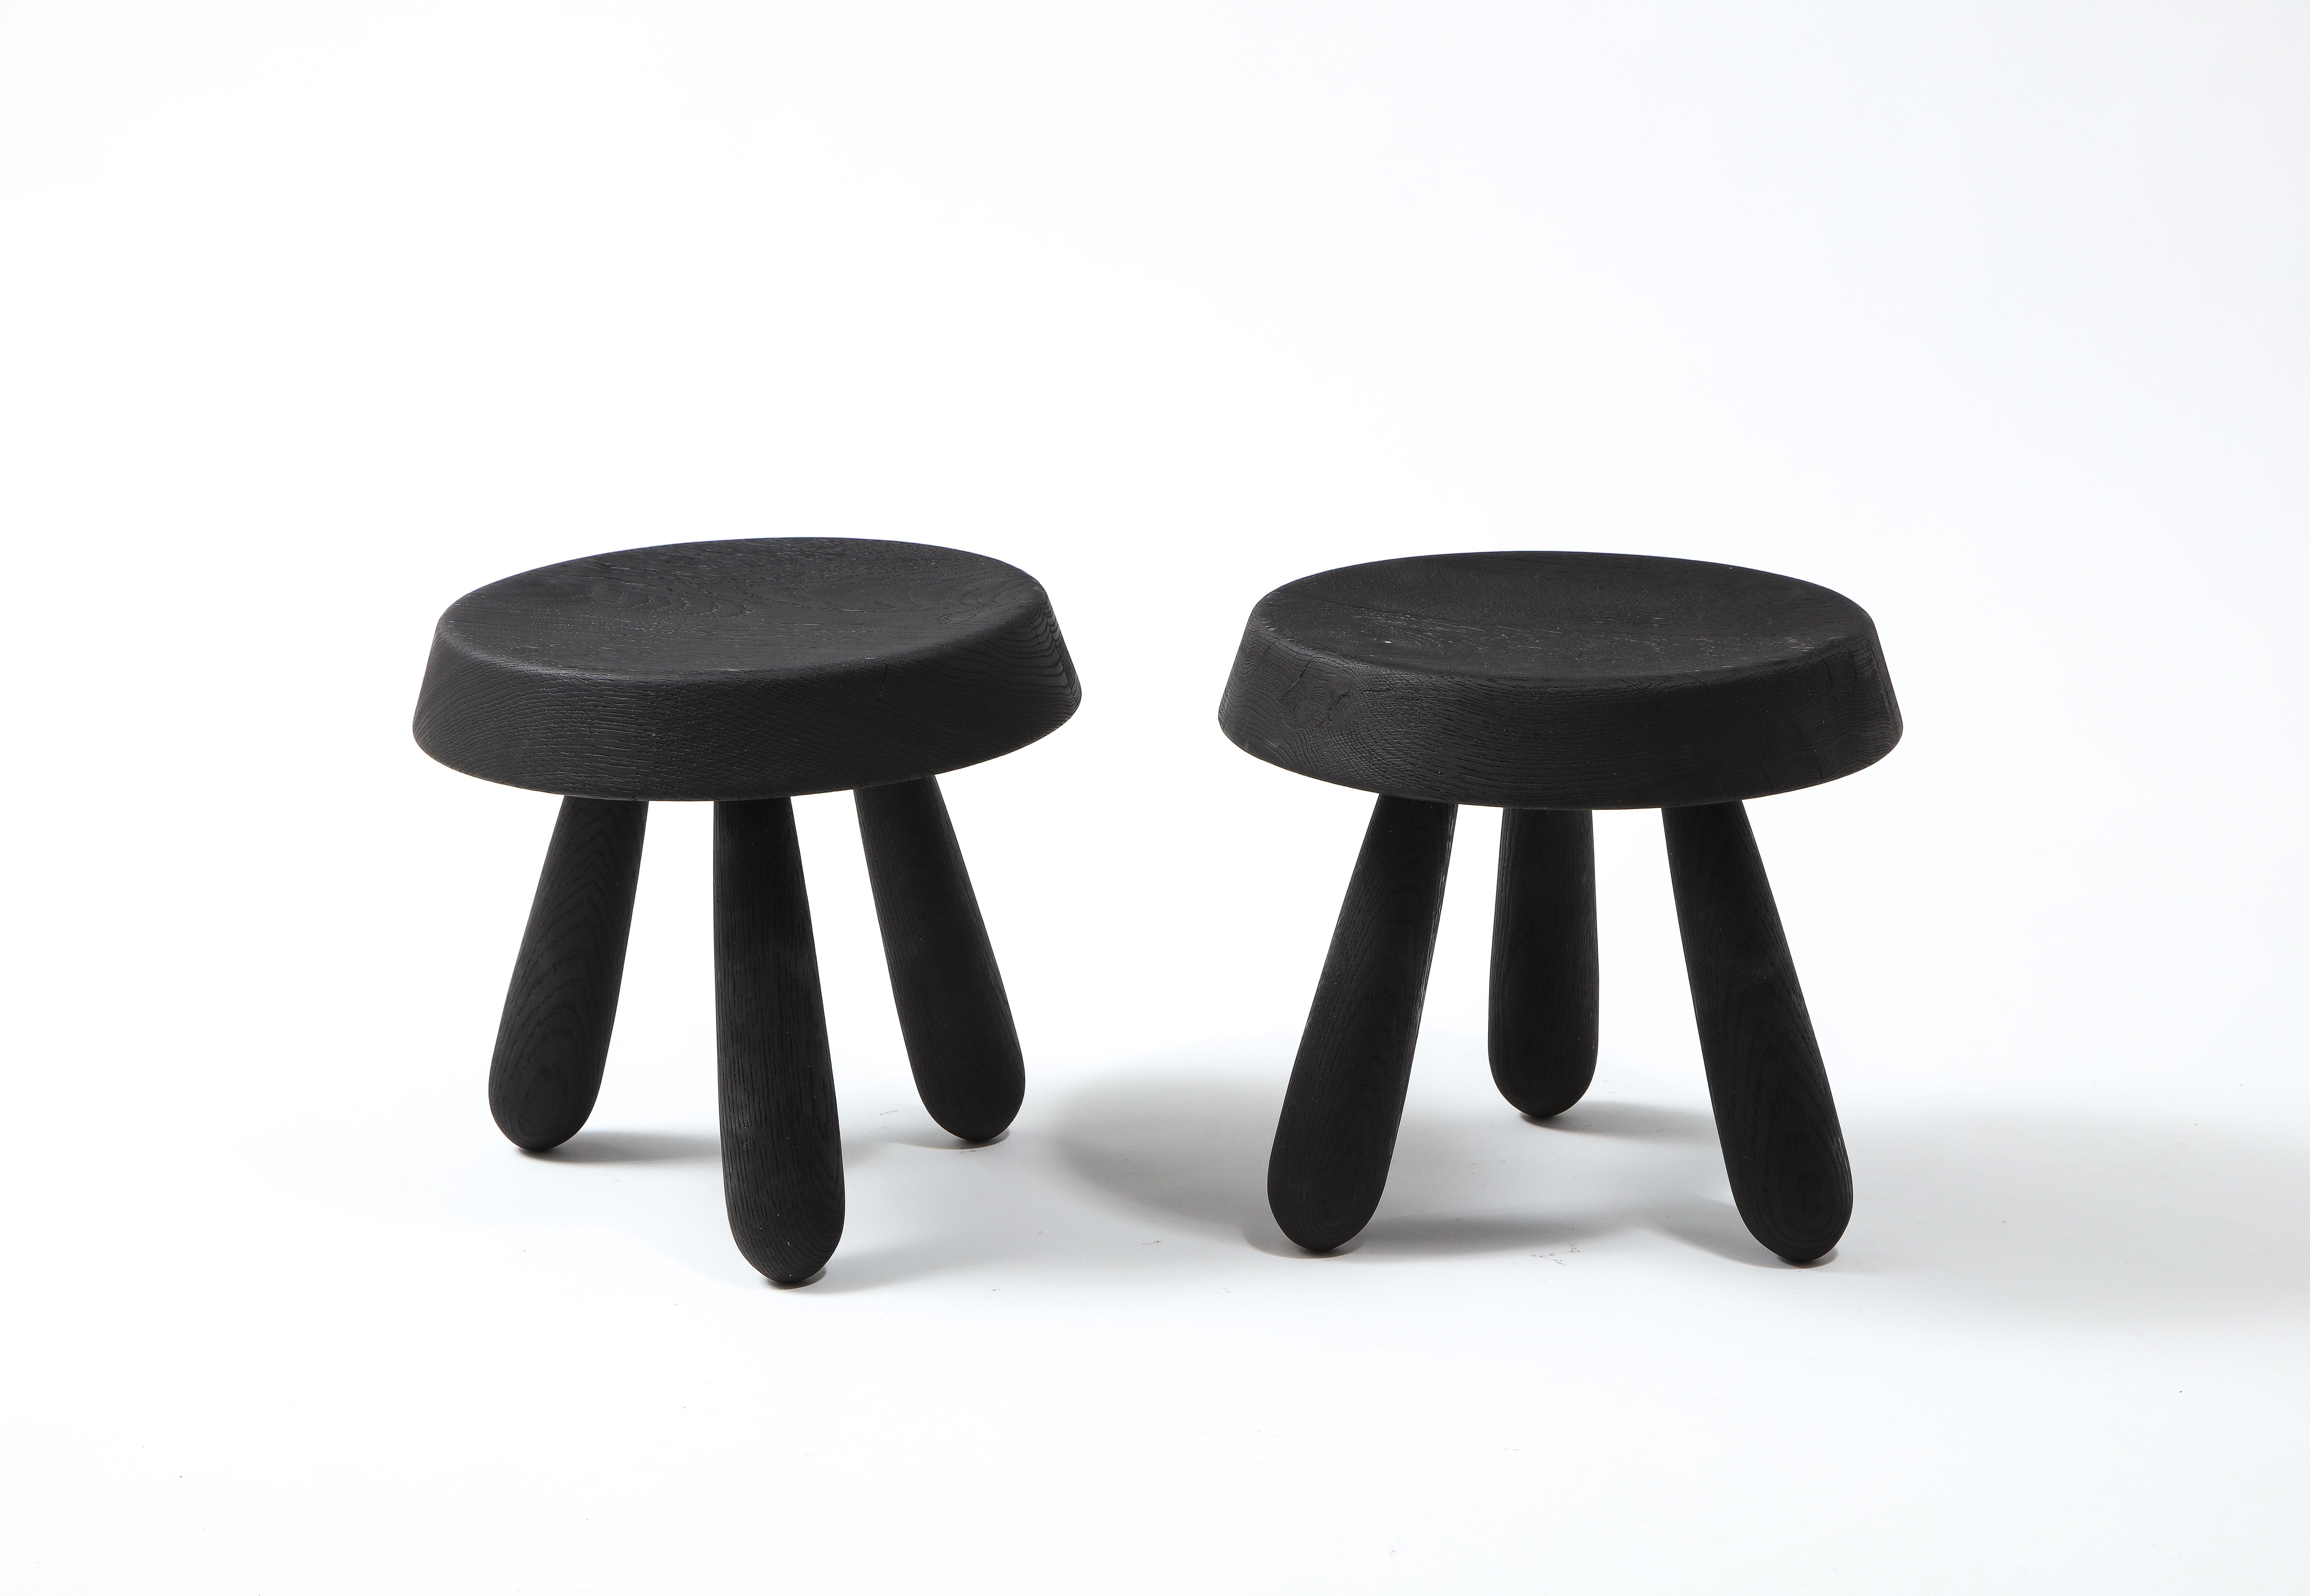 Pair of beautifully crafted petite tripod stools by French designer Douglas Mont. A thick beveled seat sits on three spindle shaped feet. Burnt Oak finish with visible wood grain. Appearance, cracks and grain may slightly vary as each stool is